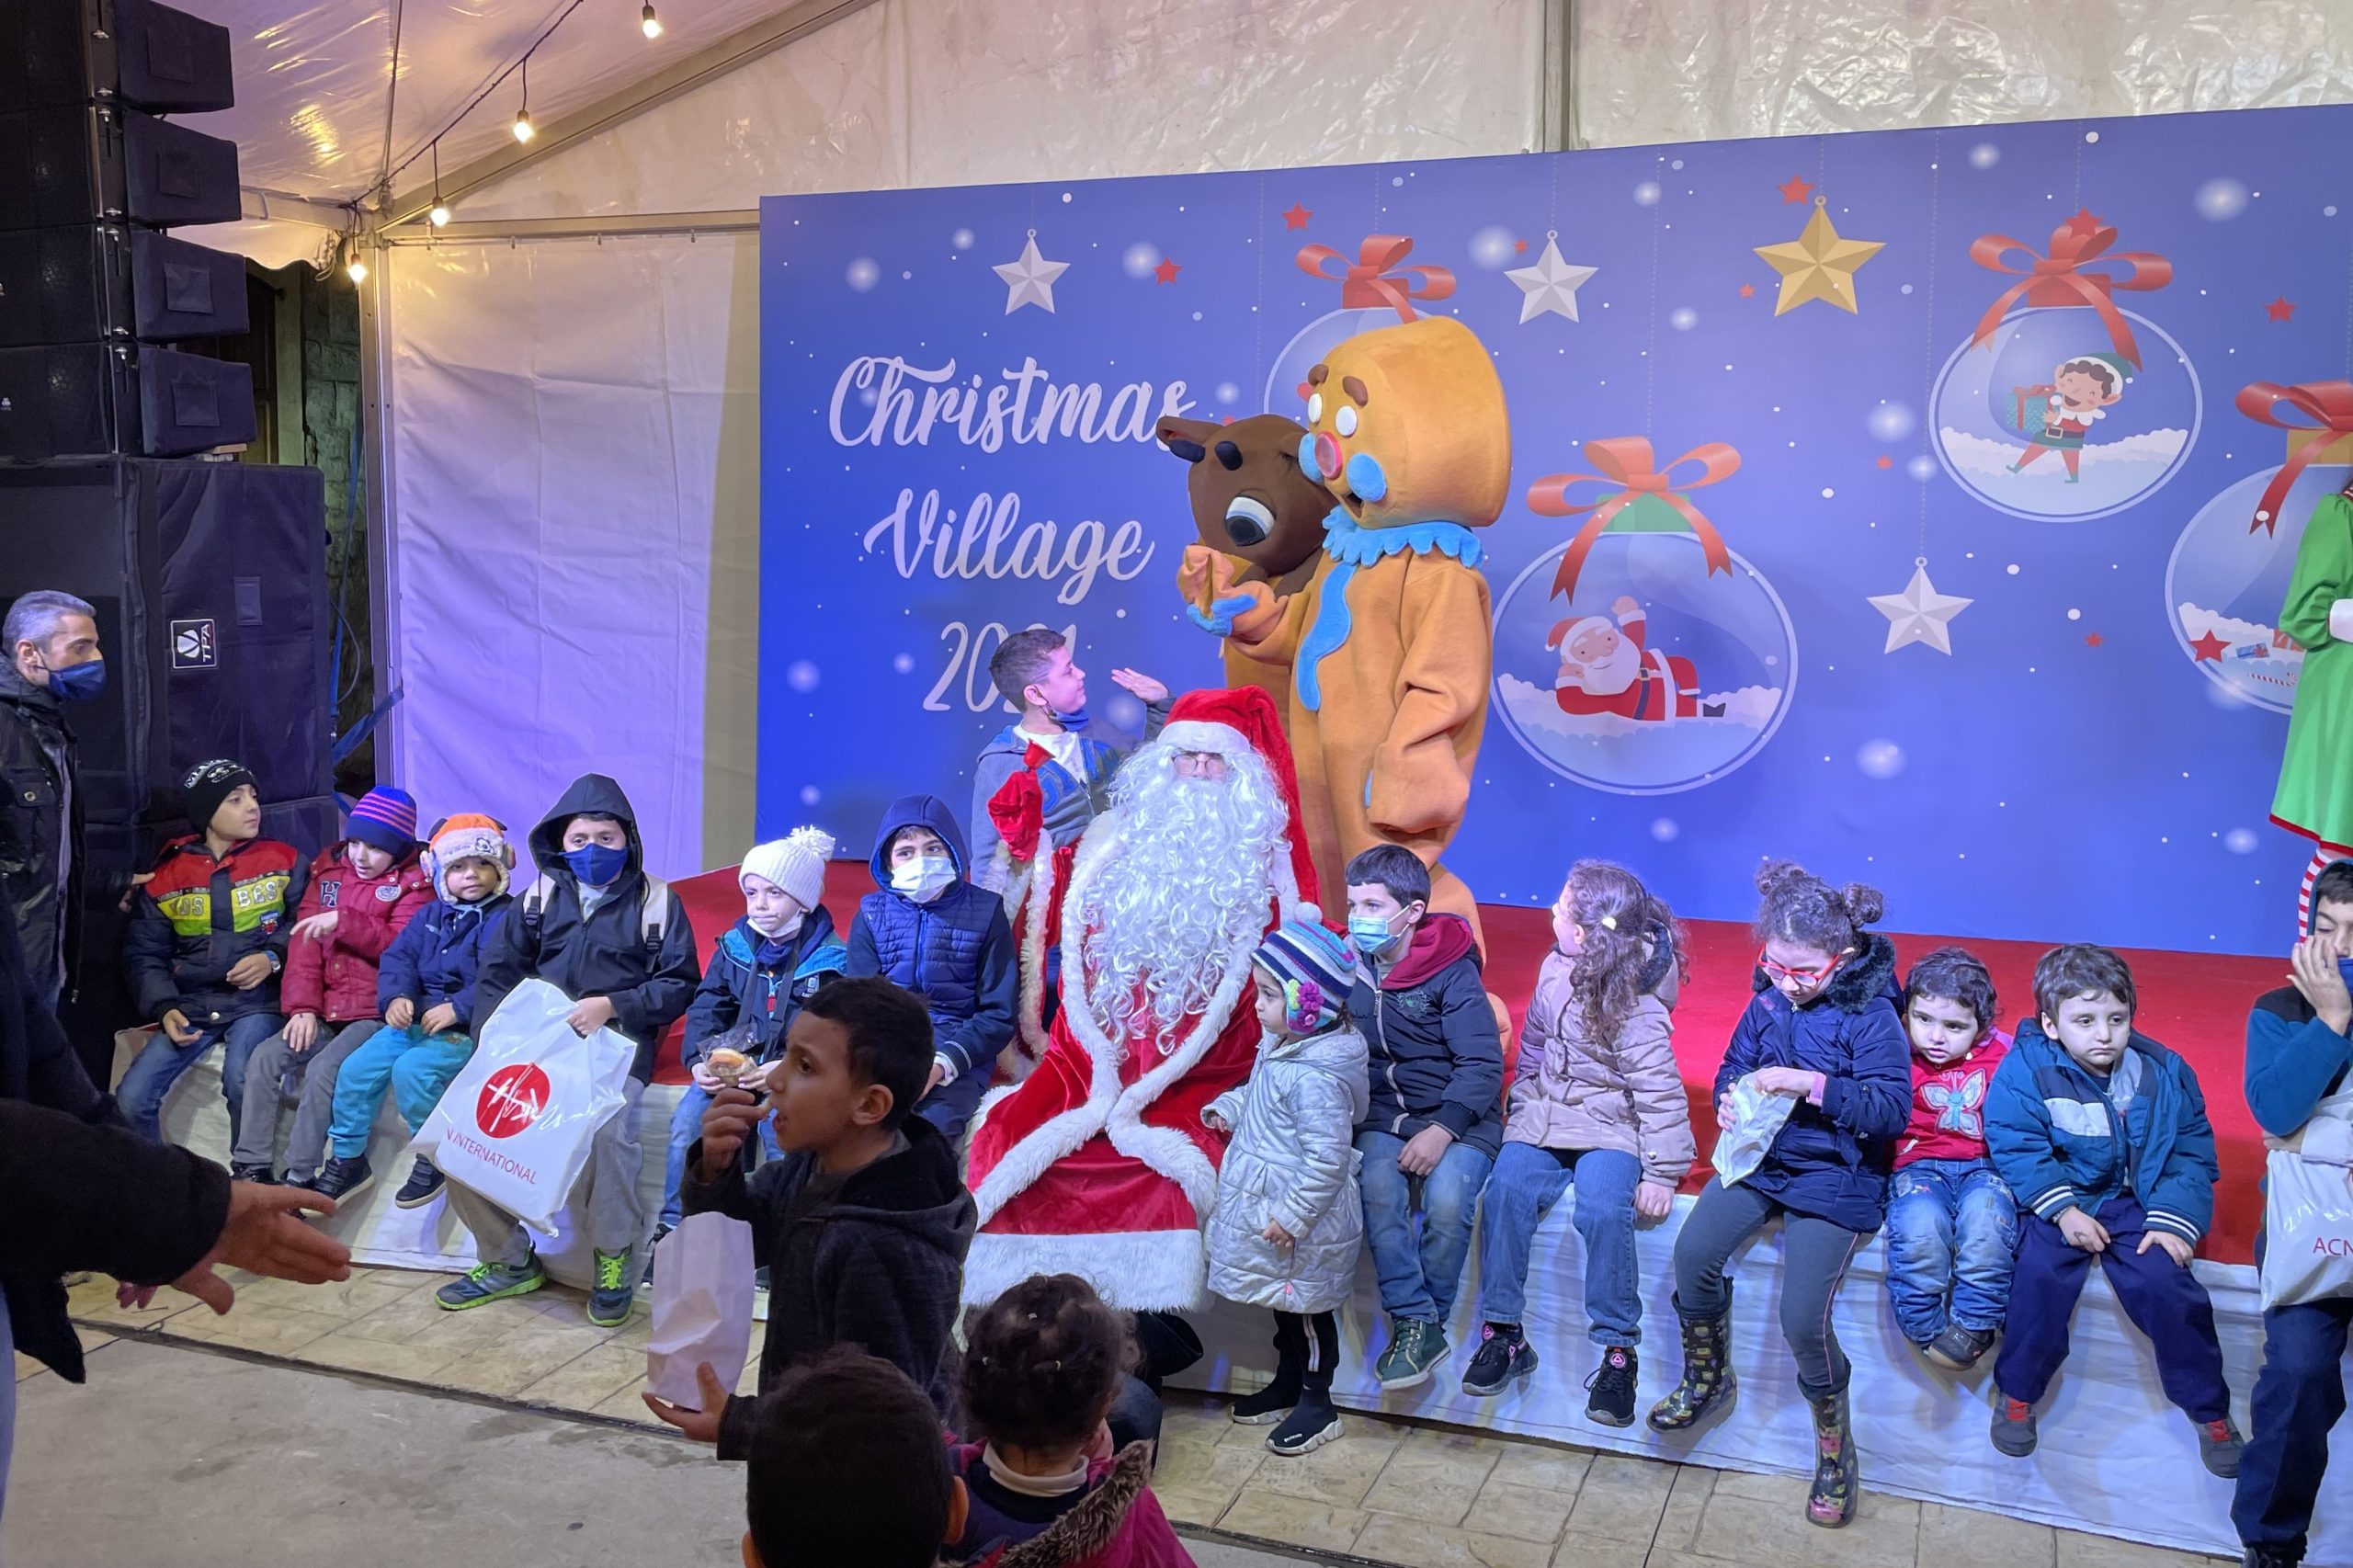 With image of children in Lebanon receiving Christmas presents in 2021 (© ACN)